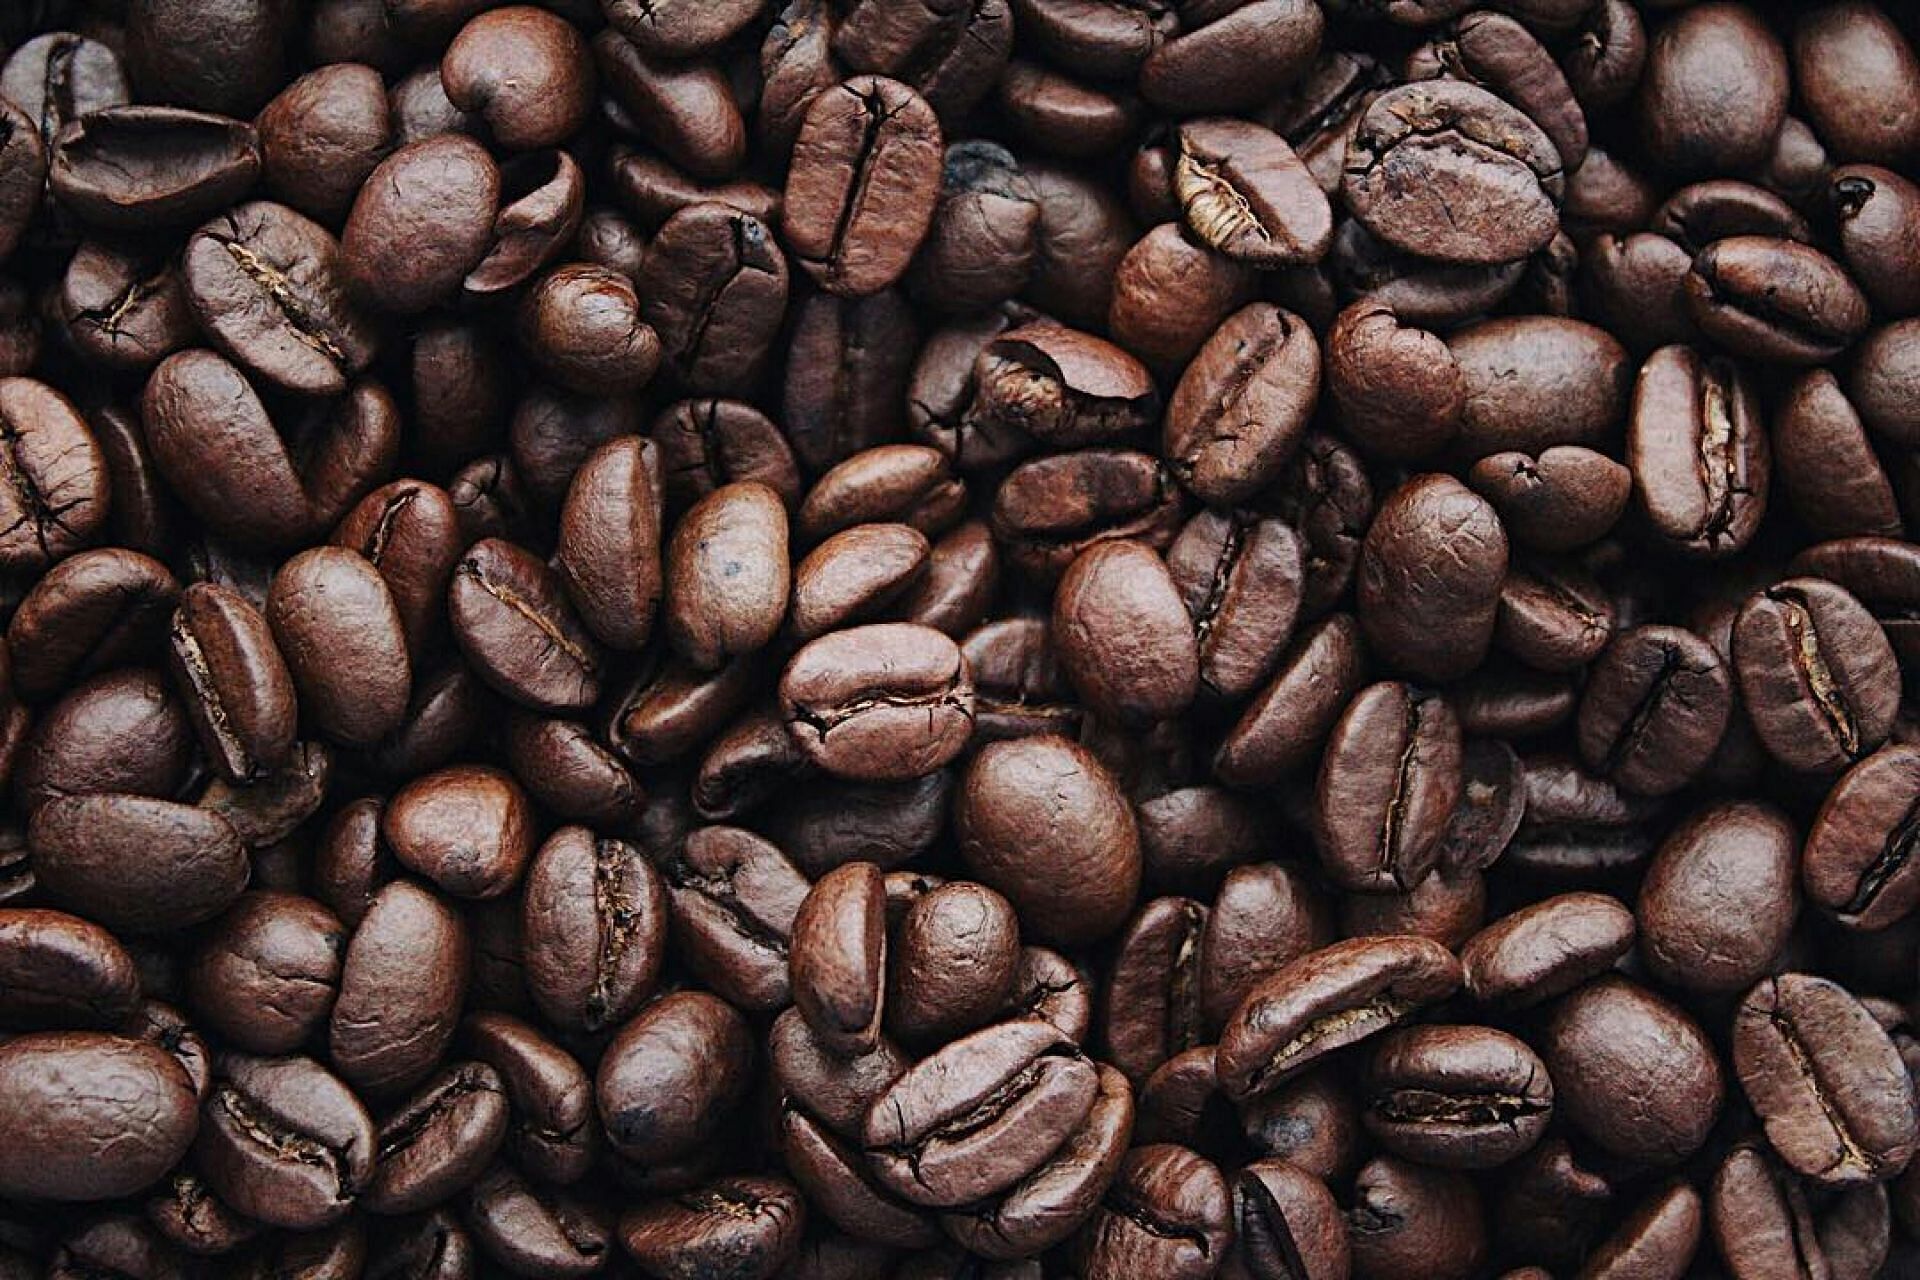 Coffee is food to stimulate the brain. (Image sourced via Pexels / Photo by haritanovich)